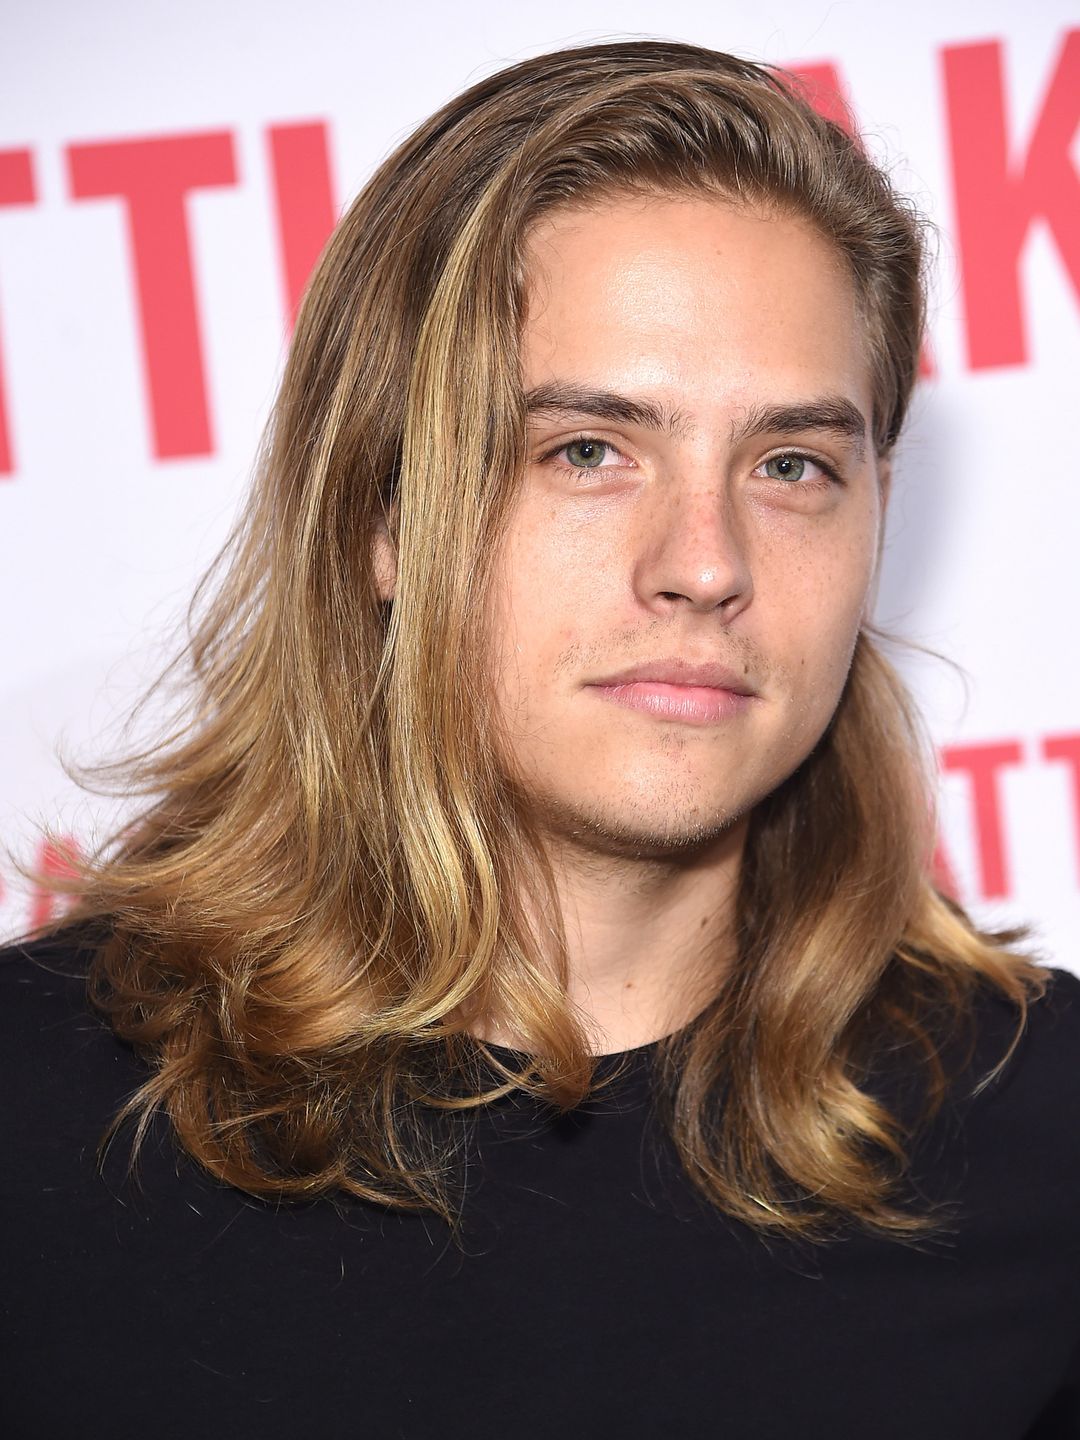 Dylan Sprouse who is he